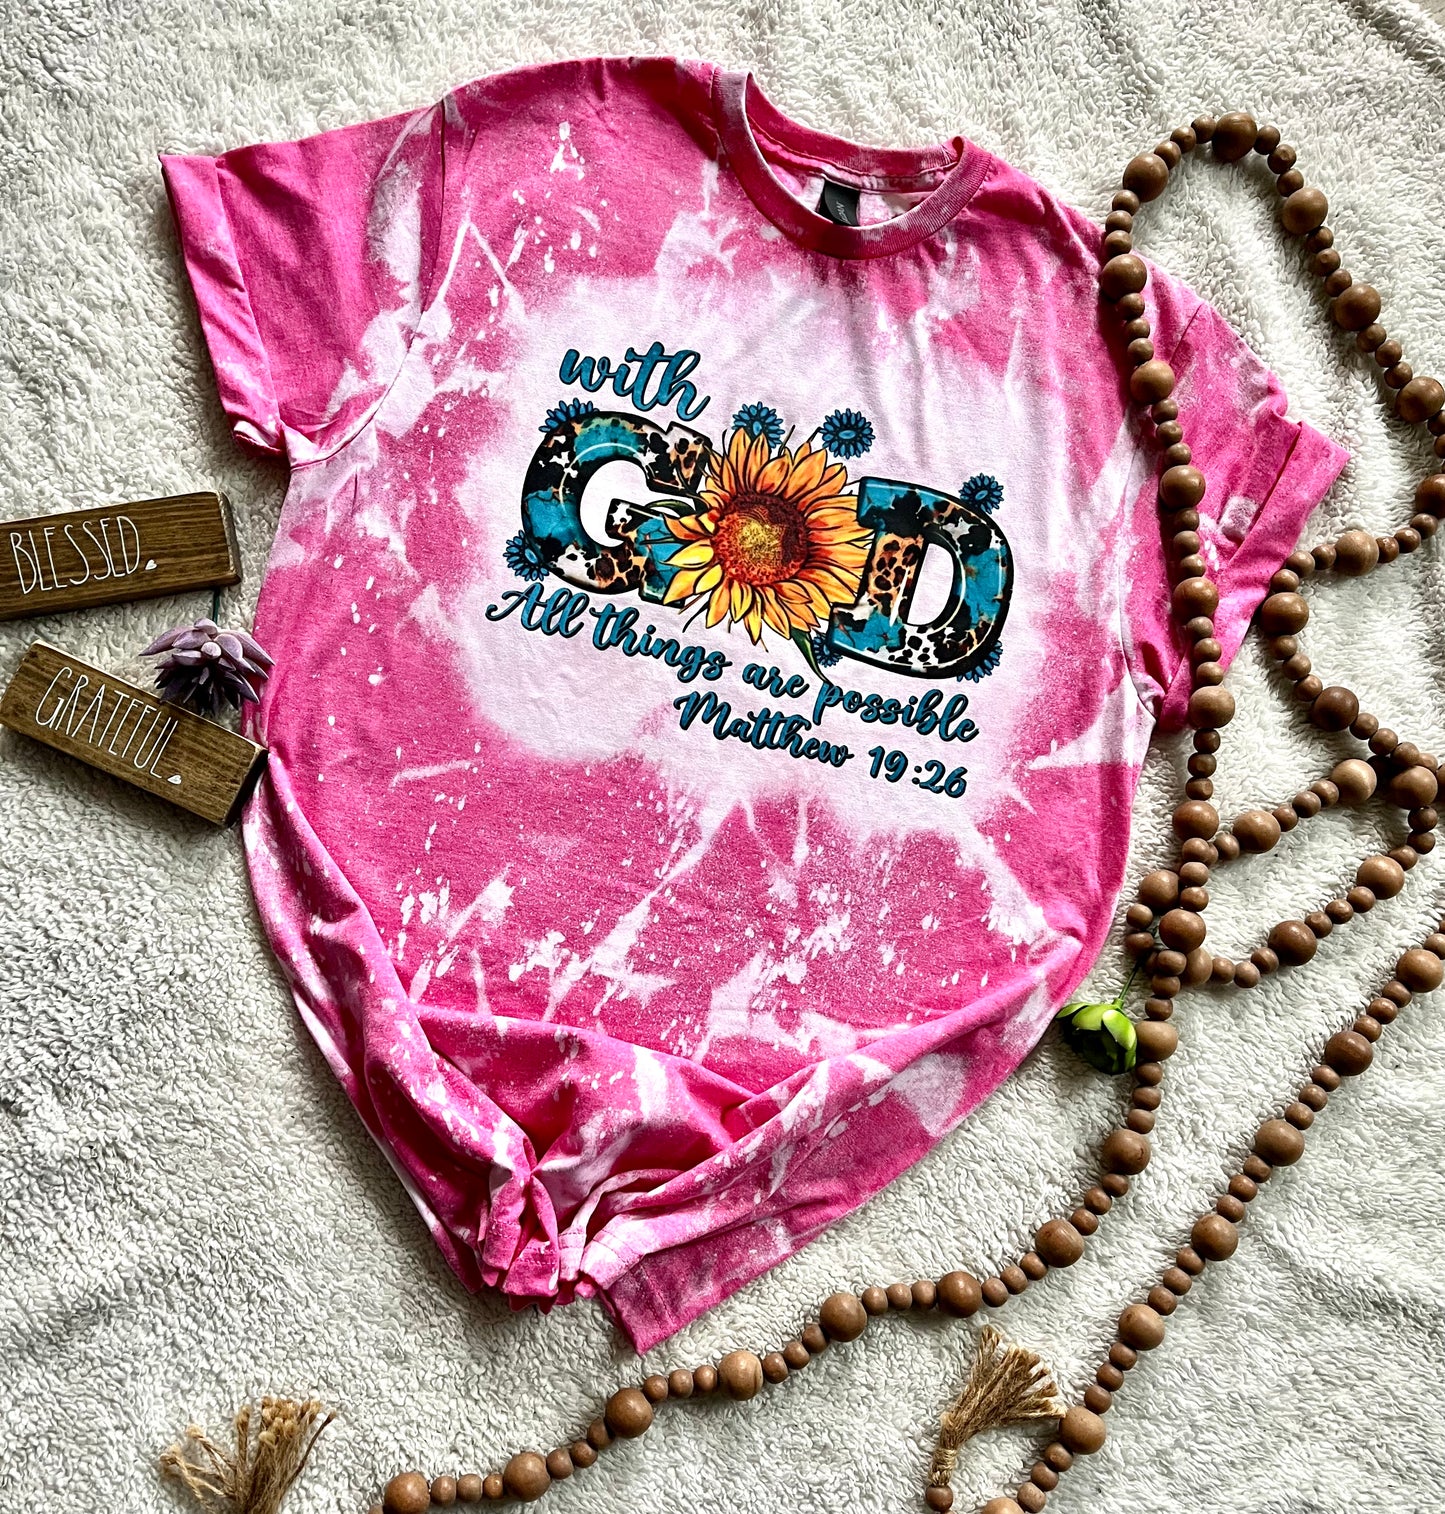 Western floral Faith T-shirt bleached tees With God all things are possible  pink sunflower shirt